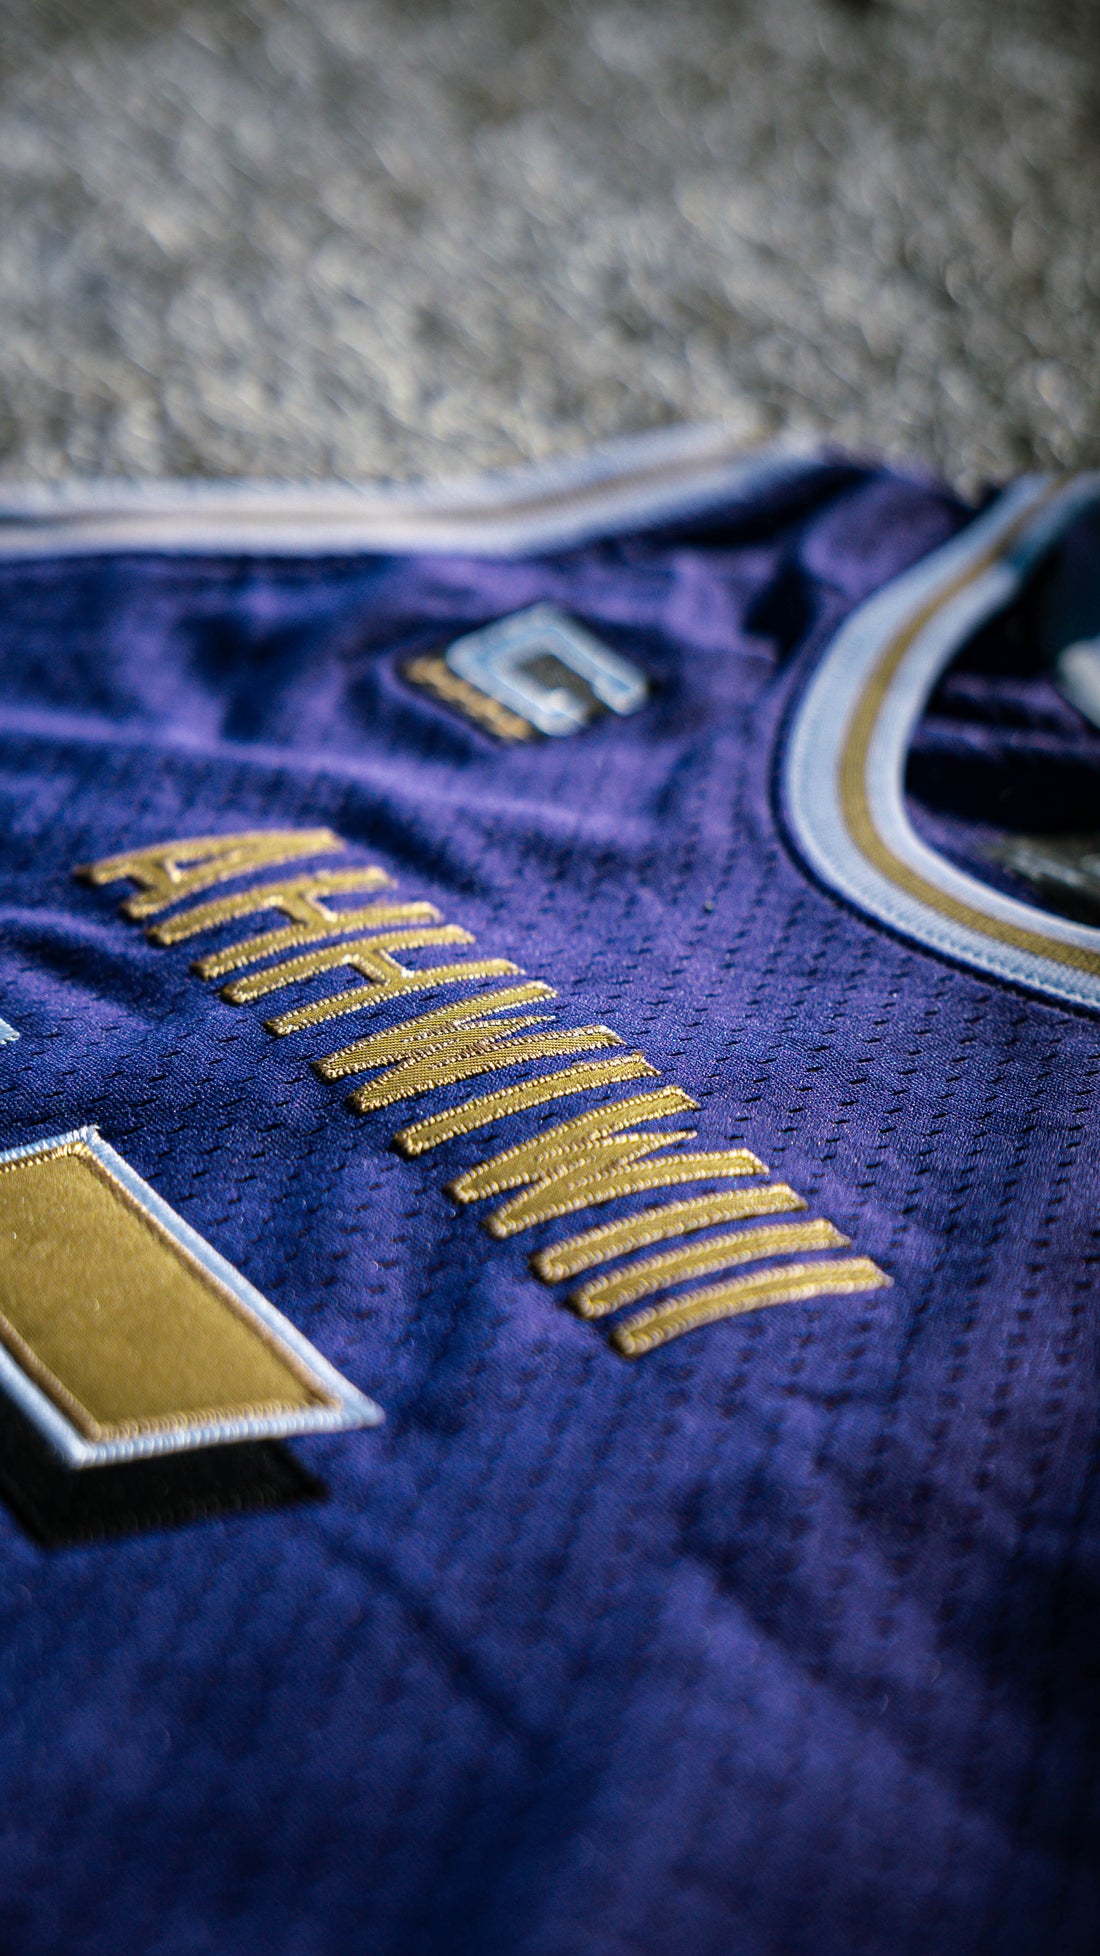 "BALTIMORE" CAPTAIN AHHWIWIII JERSEY